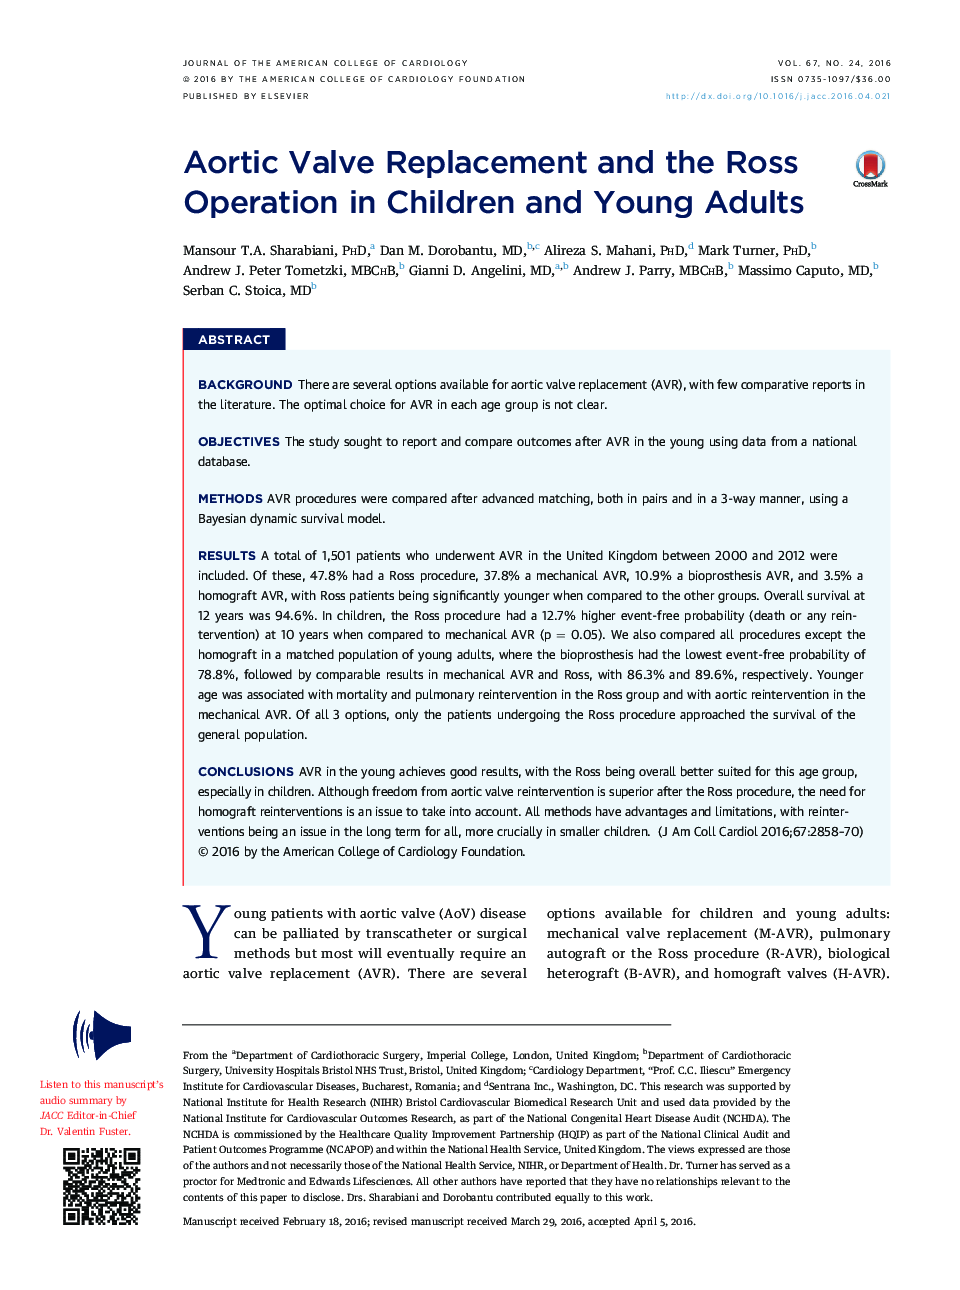 Aortic Valve Replacement and the Ross Operation in Children and Young Adults 